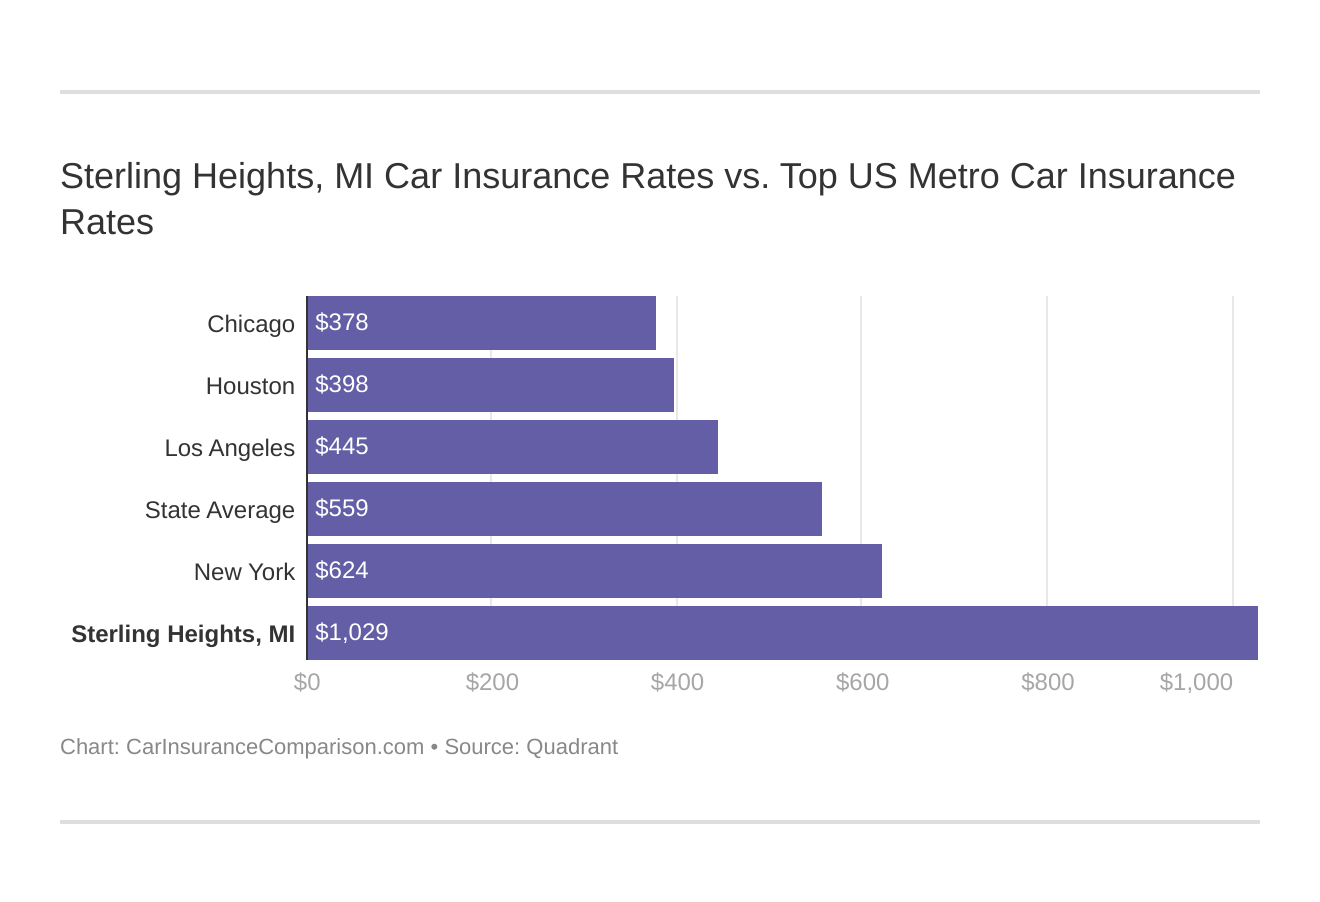 Sterling Heights, MI Car Insurance Rates vs. Top US Metro Car Insurance Rates